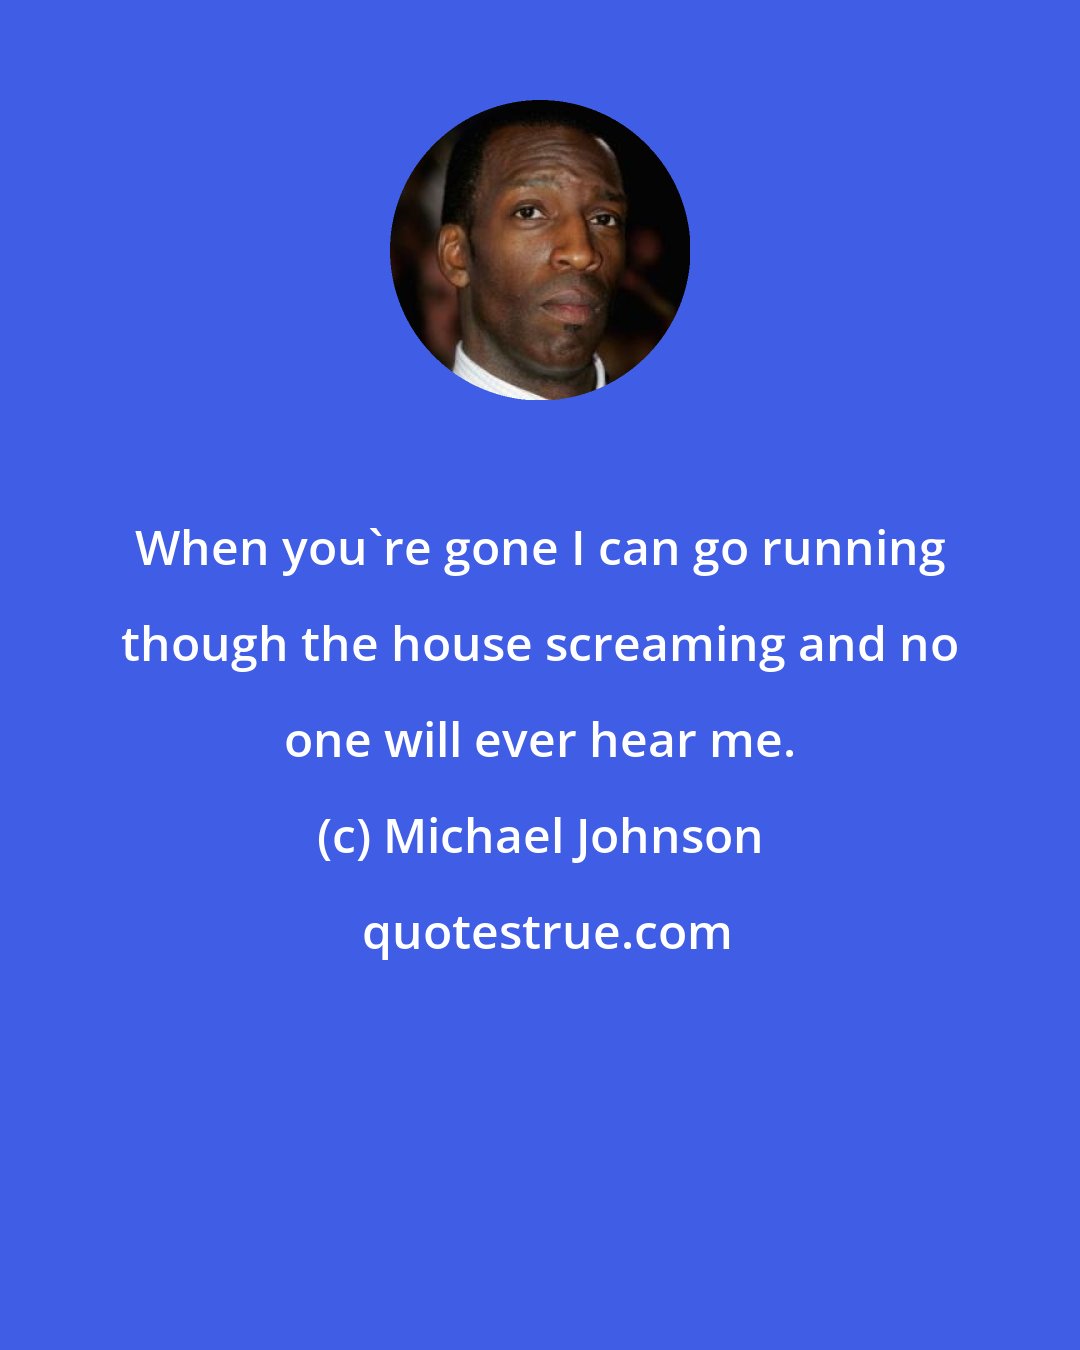 Michael Johnson: When you're gone I can go running though the house screaming and no one will ever hear me.